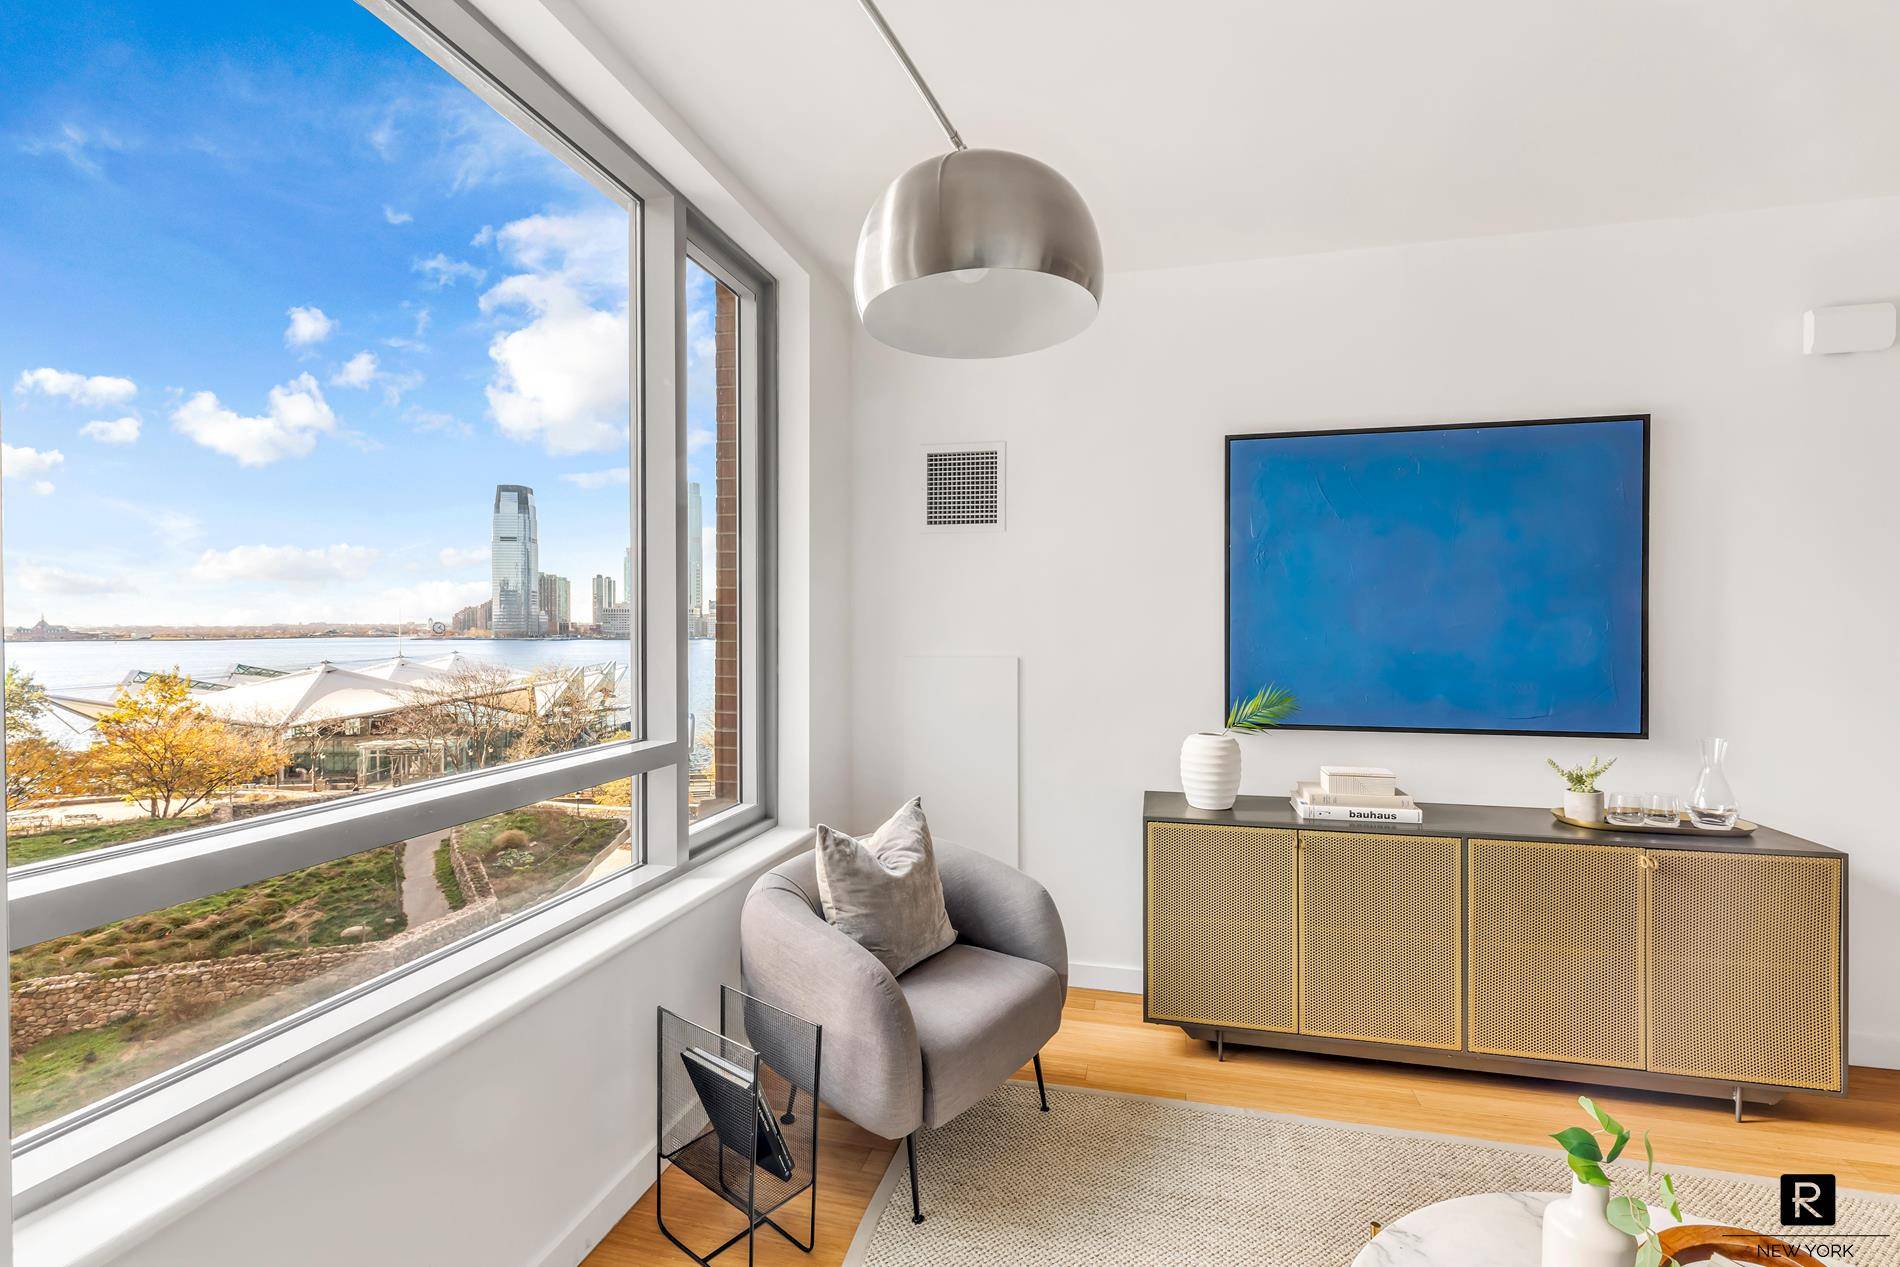 Quintessential two bedroom two bath apartment with Hudson river views in the Riverhouse, the only water front LEED Gold rated green condominium in North Battery Park West Tribeca.